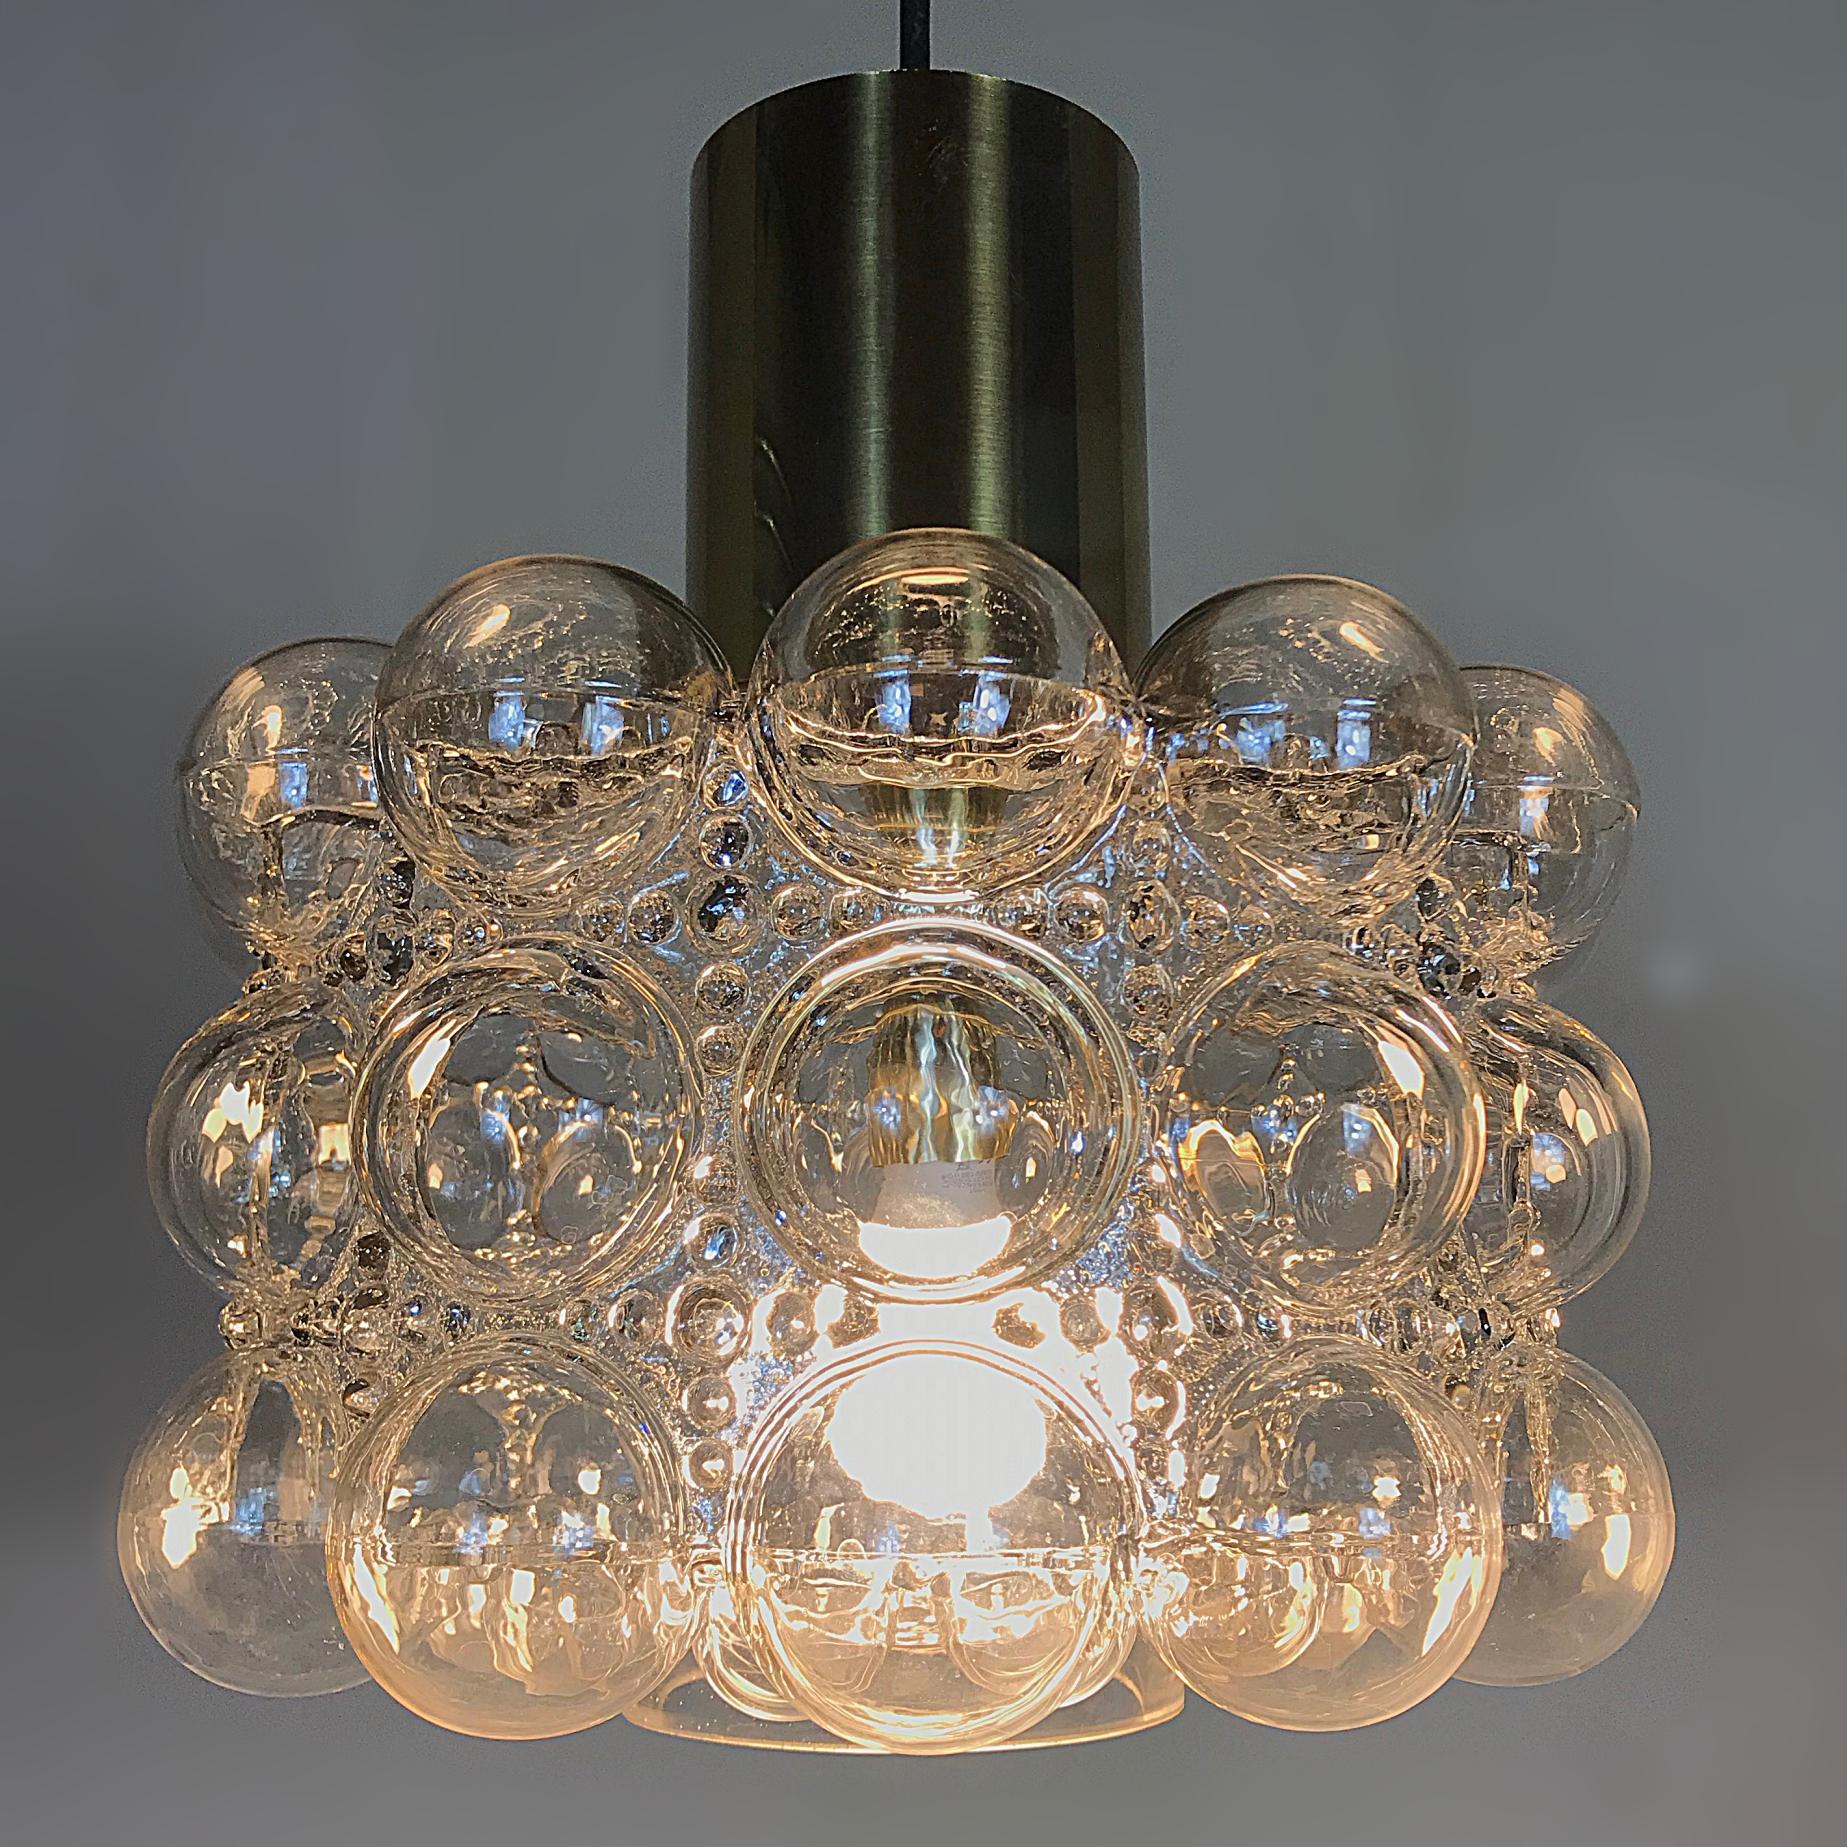 Beautiful Space Age bubble clear glass pendant lamp manufactured by Glashütte Limburg, with the characteristic blown glass designed by Helena Tynell. This lamp is a striking appearance in any room. Due to the sublime combination of glass and brass,